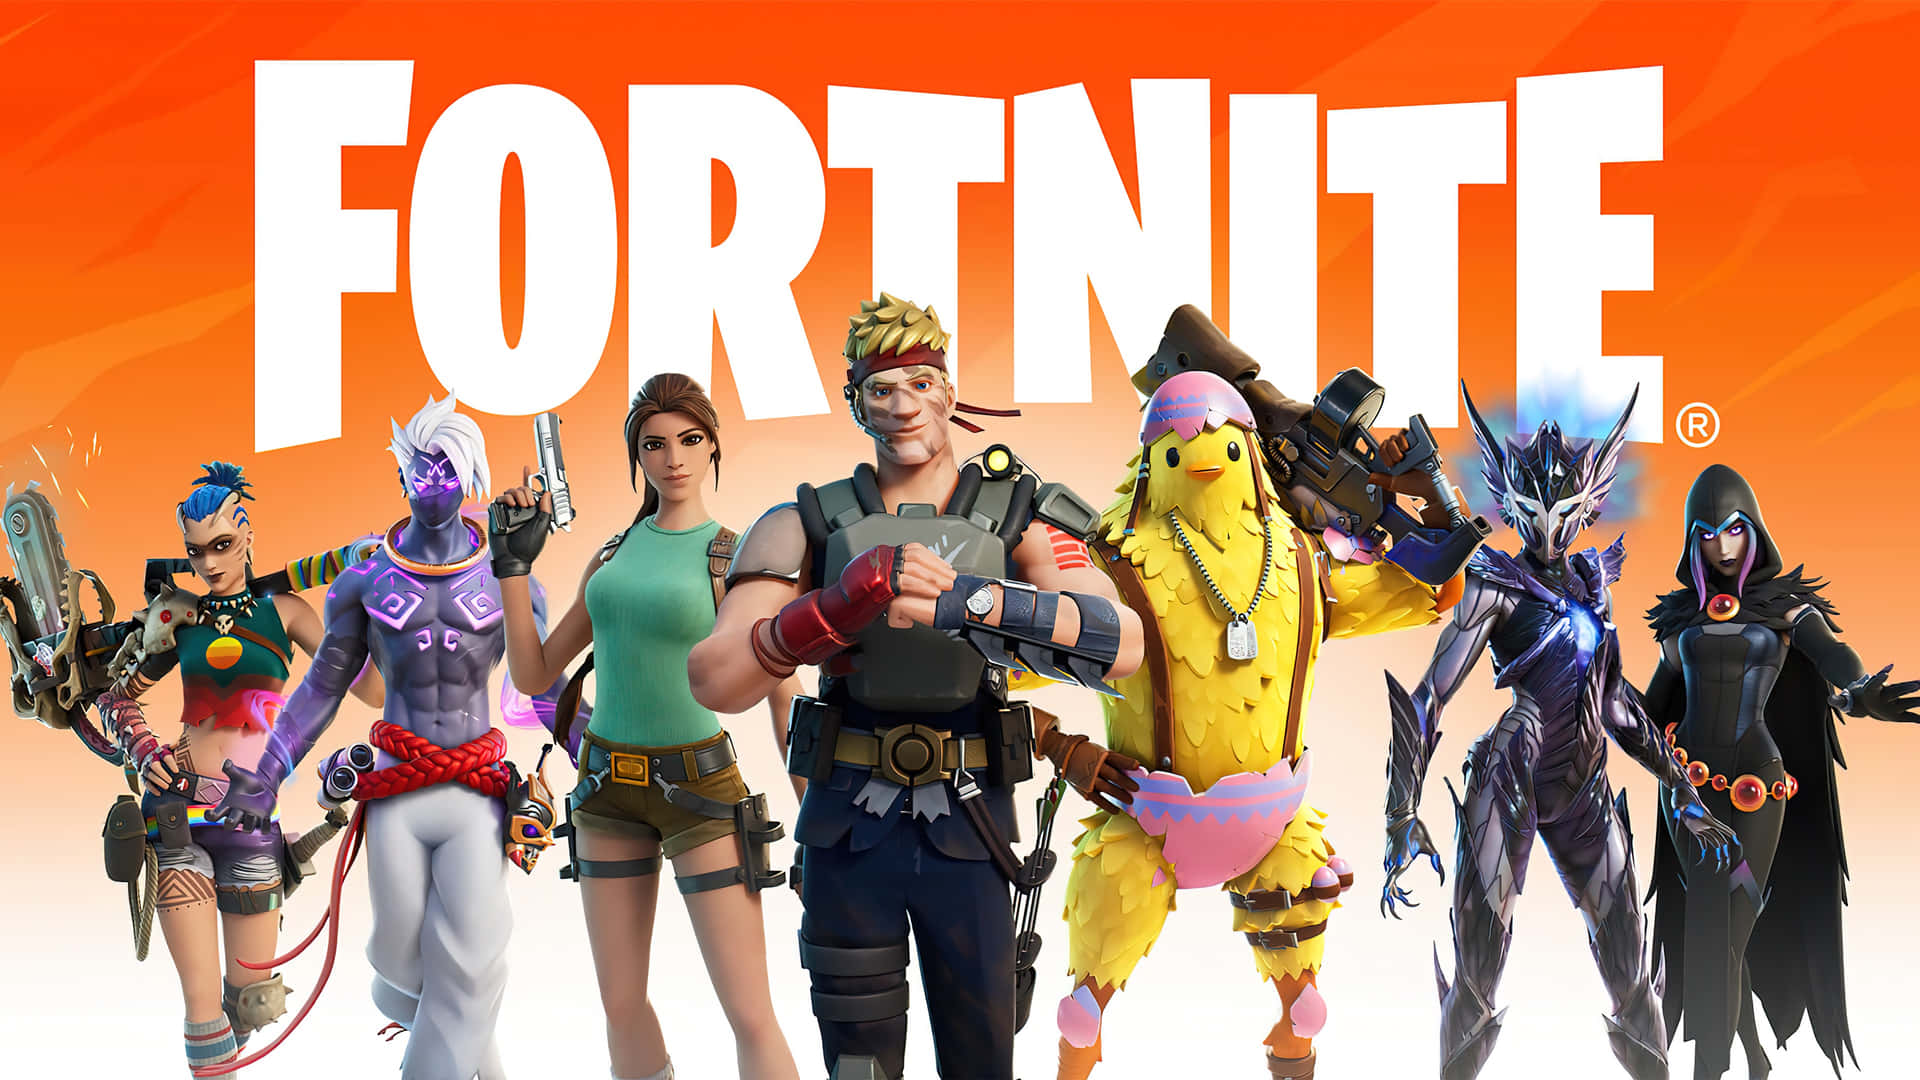 Fortnite Logo With A Group Of Characters Wallpaper